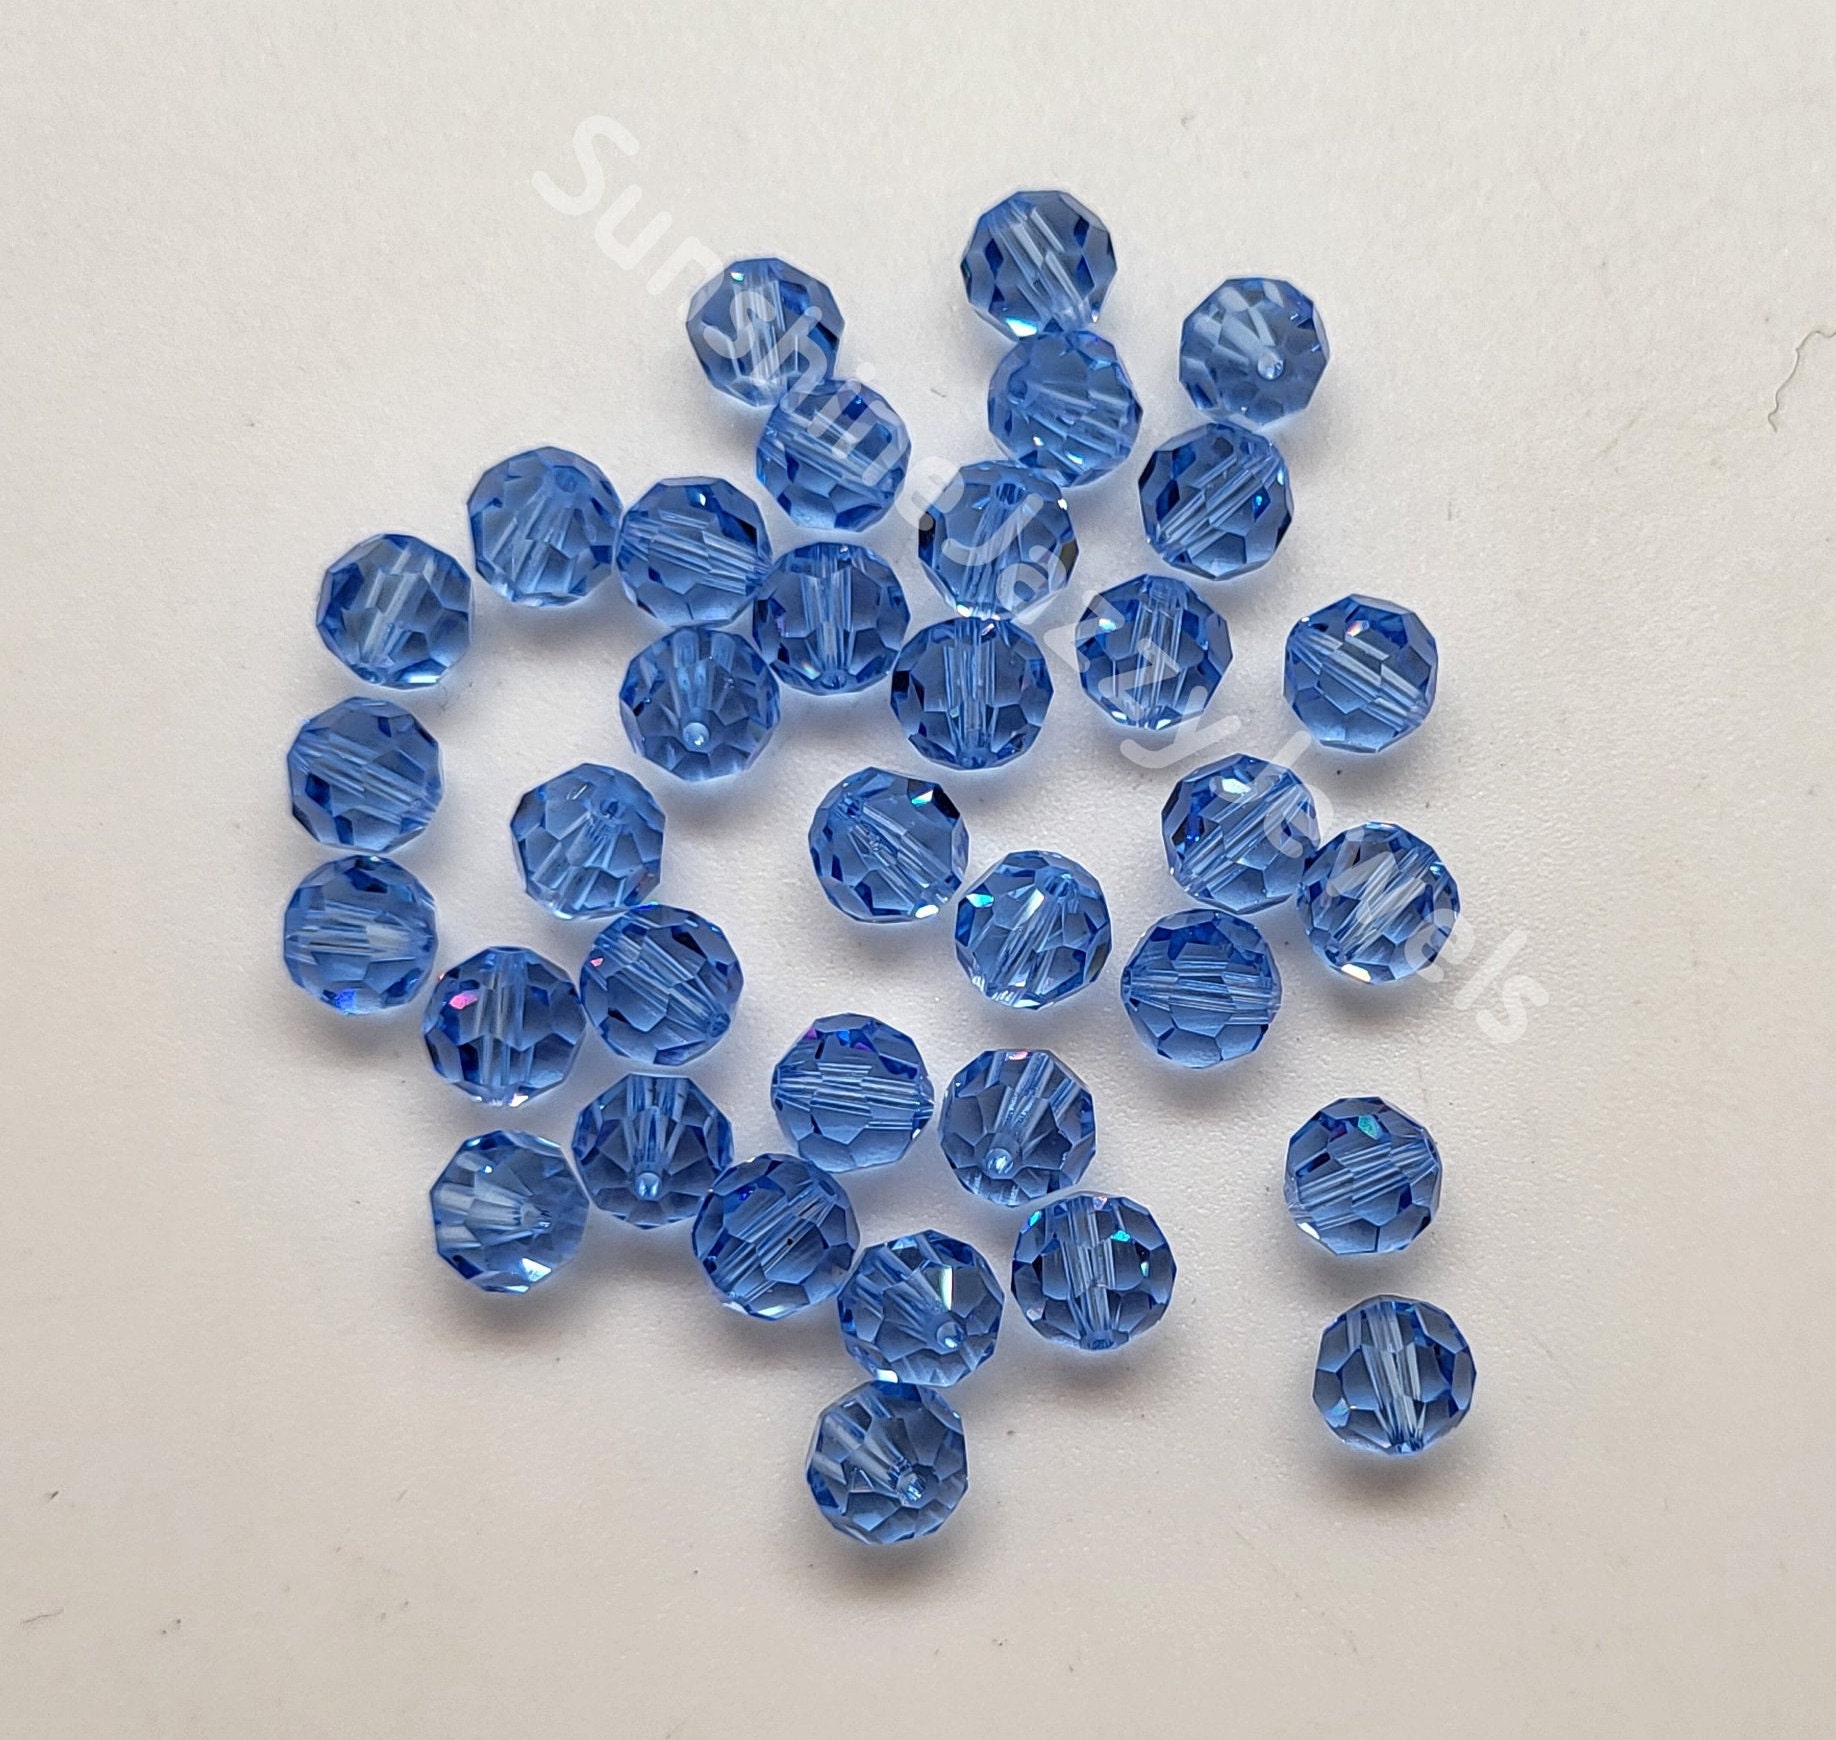 AUTHENTIC Swarovski® Crystal #5000 6mm Round Beads, 36pcs or 360pc Factory  Pack